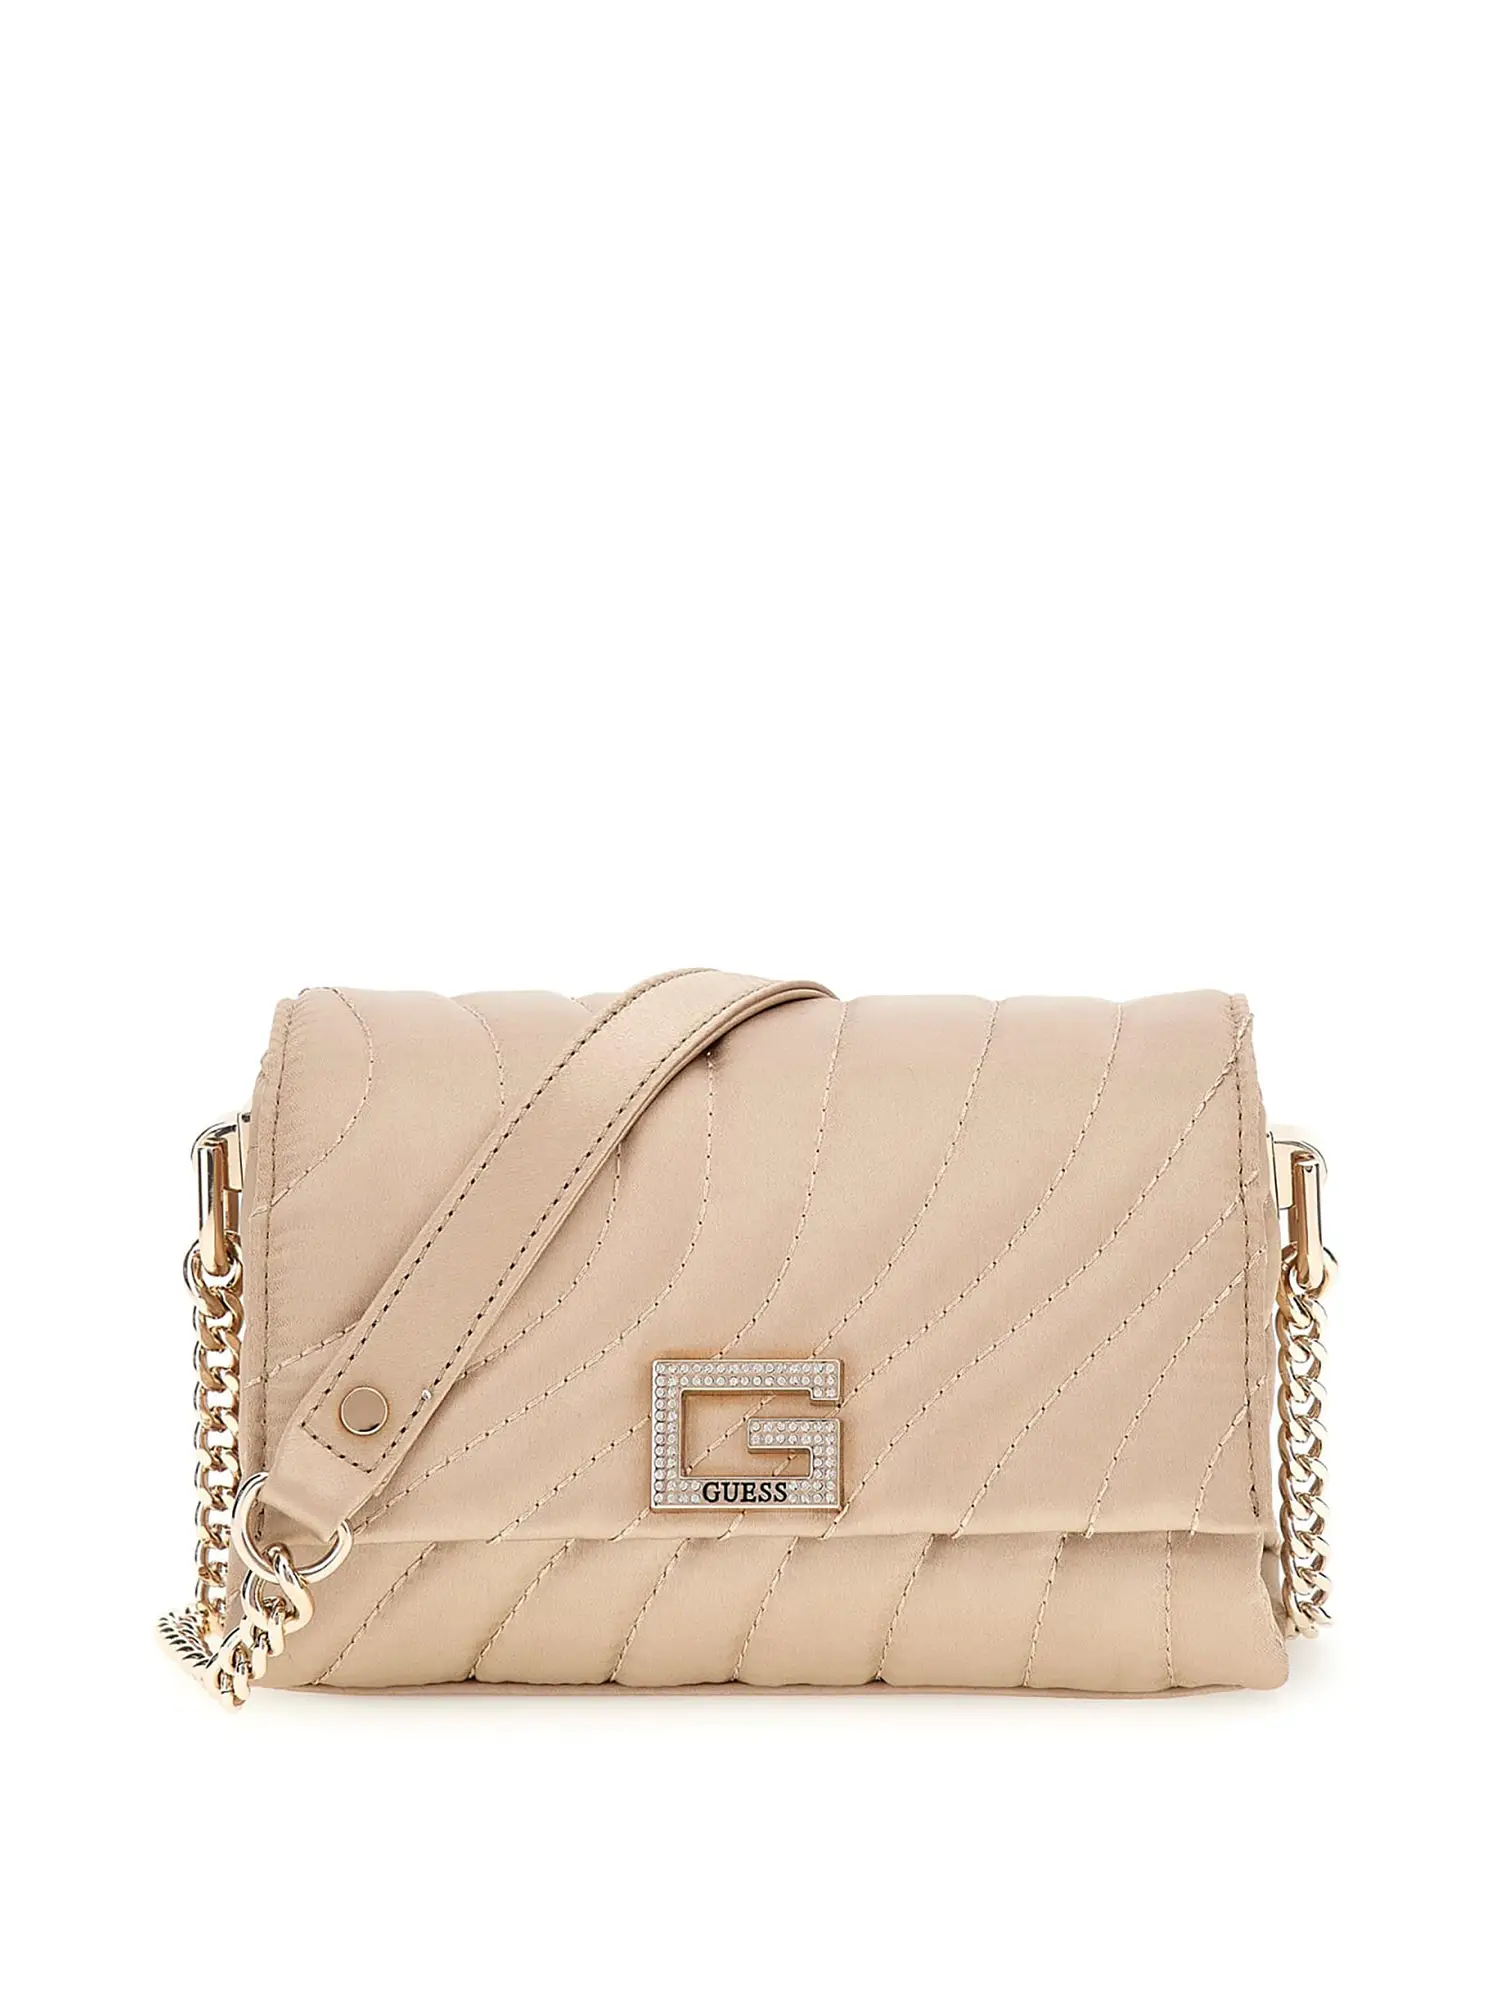 TRACOLLA DONNA - GUESS - HWEG92 23780 - TAUPE, UNICA